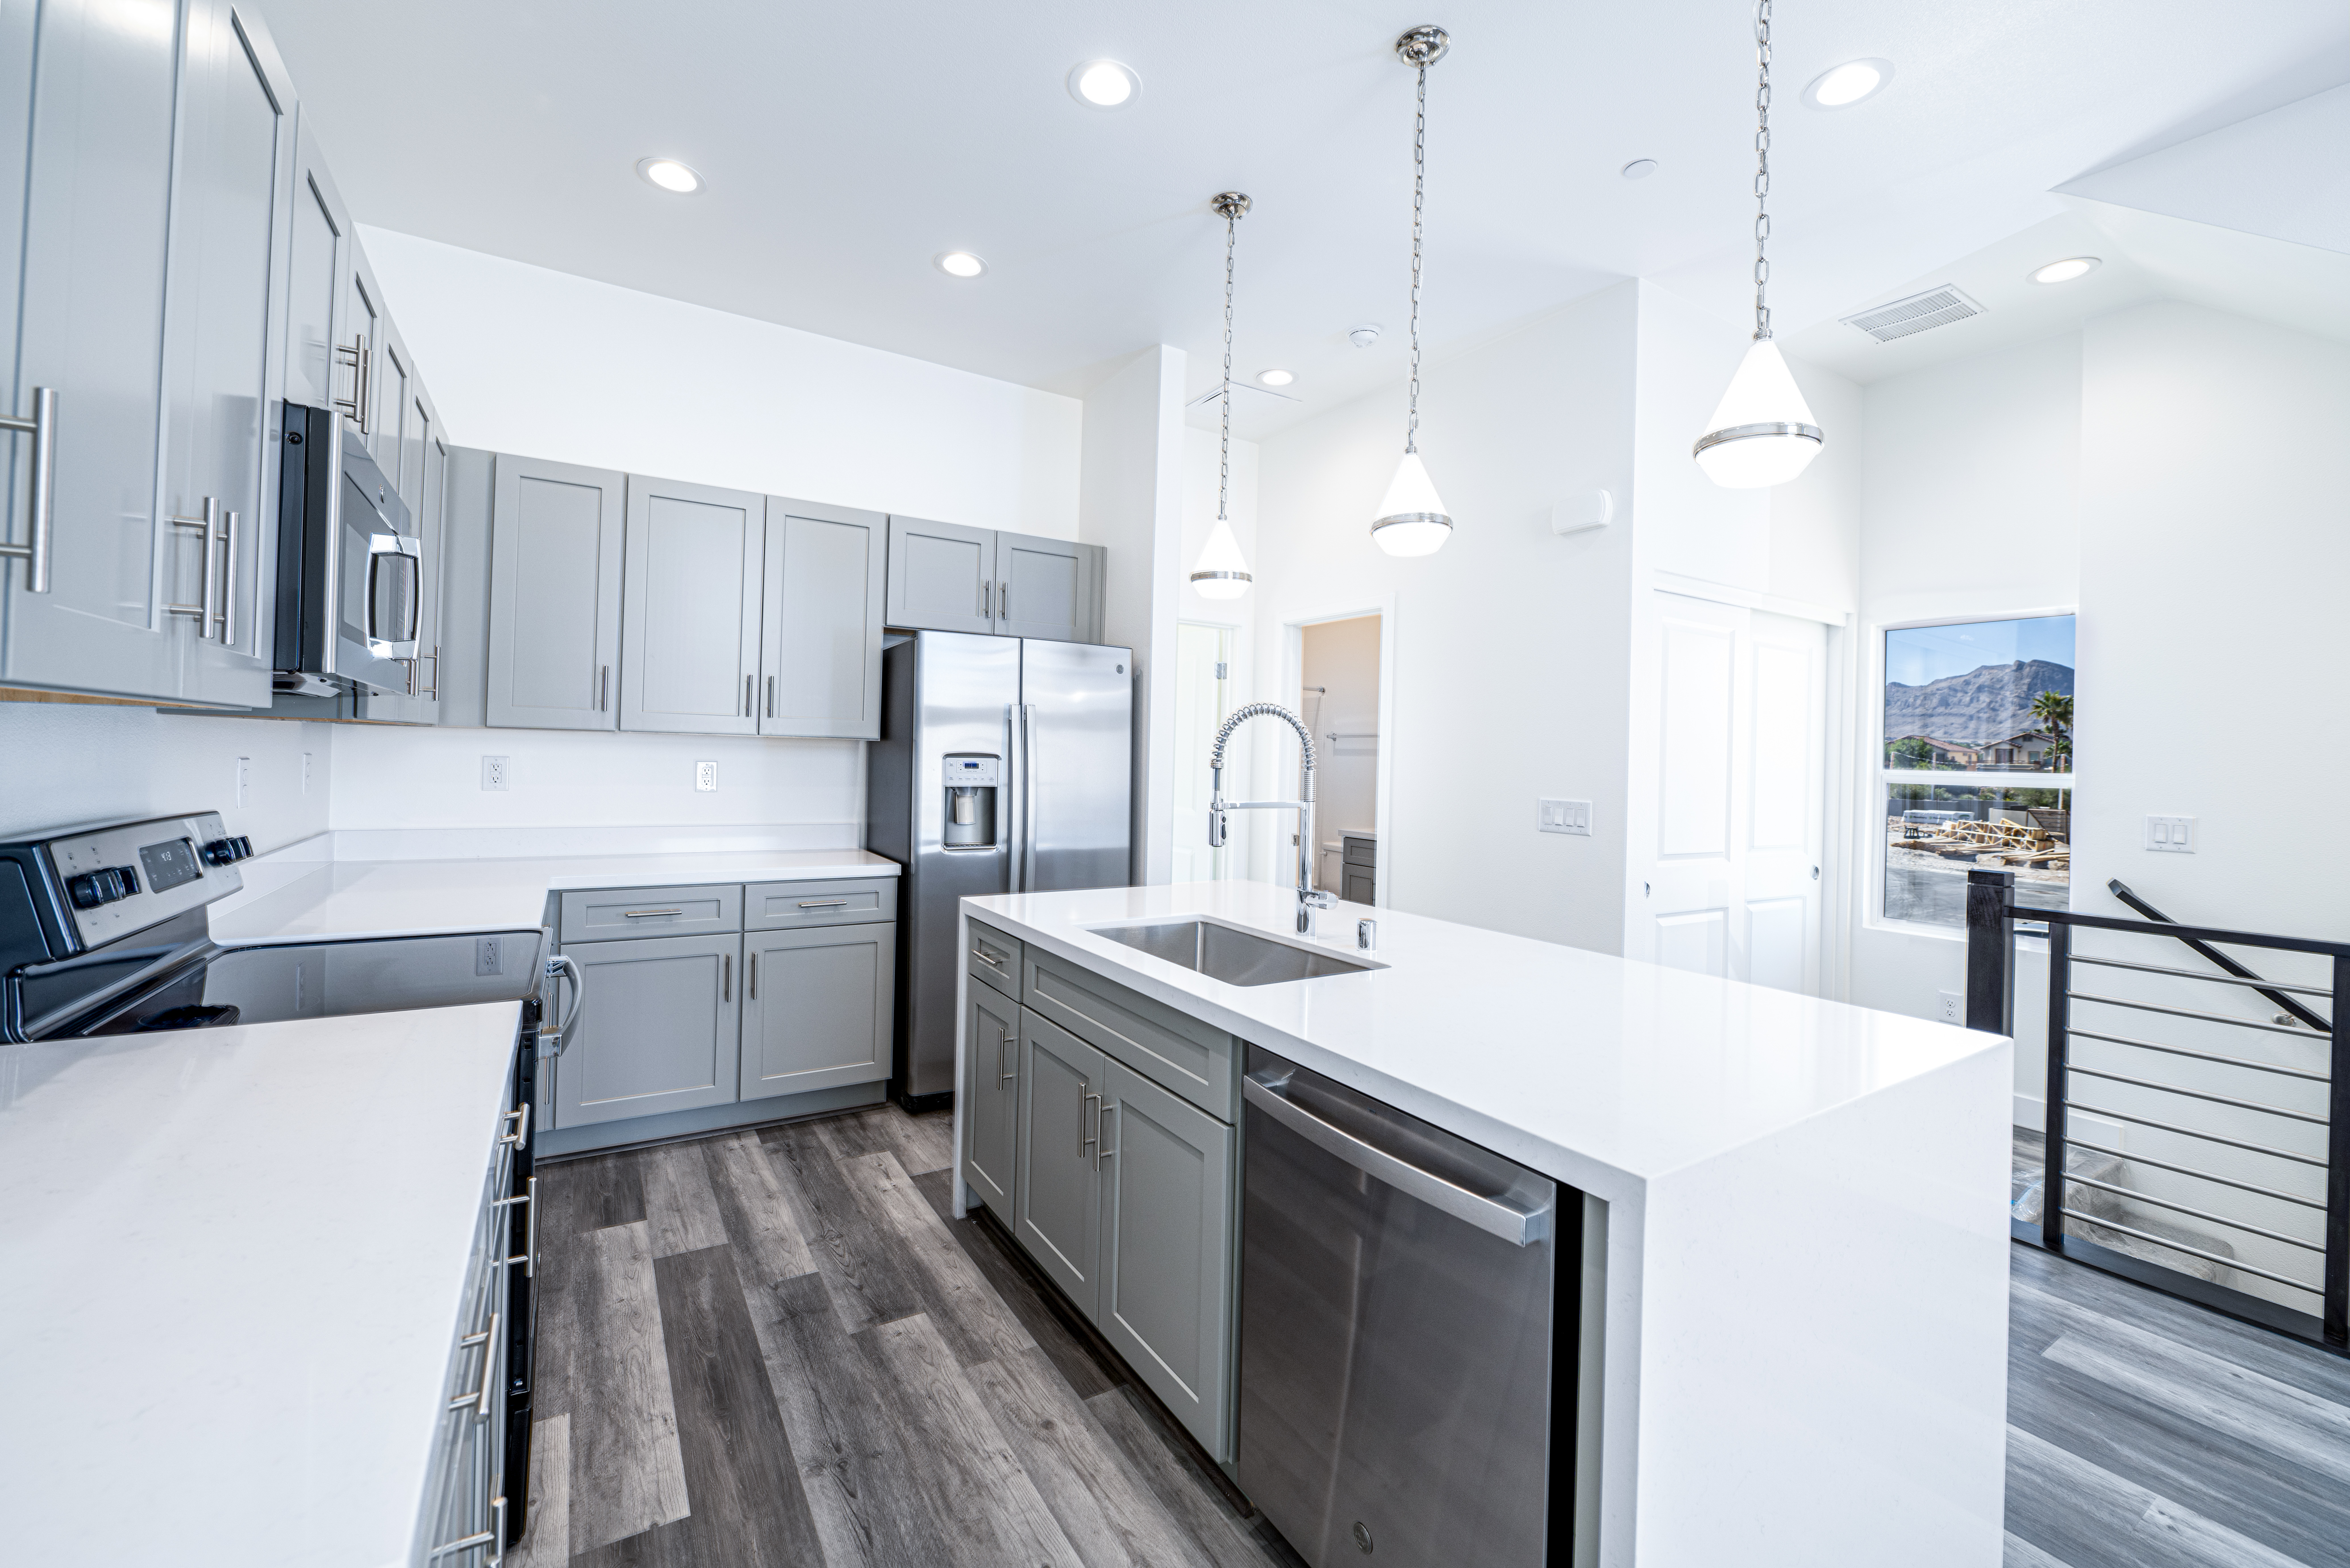 Kitchen of Unit C at Thrive by Edward Homes